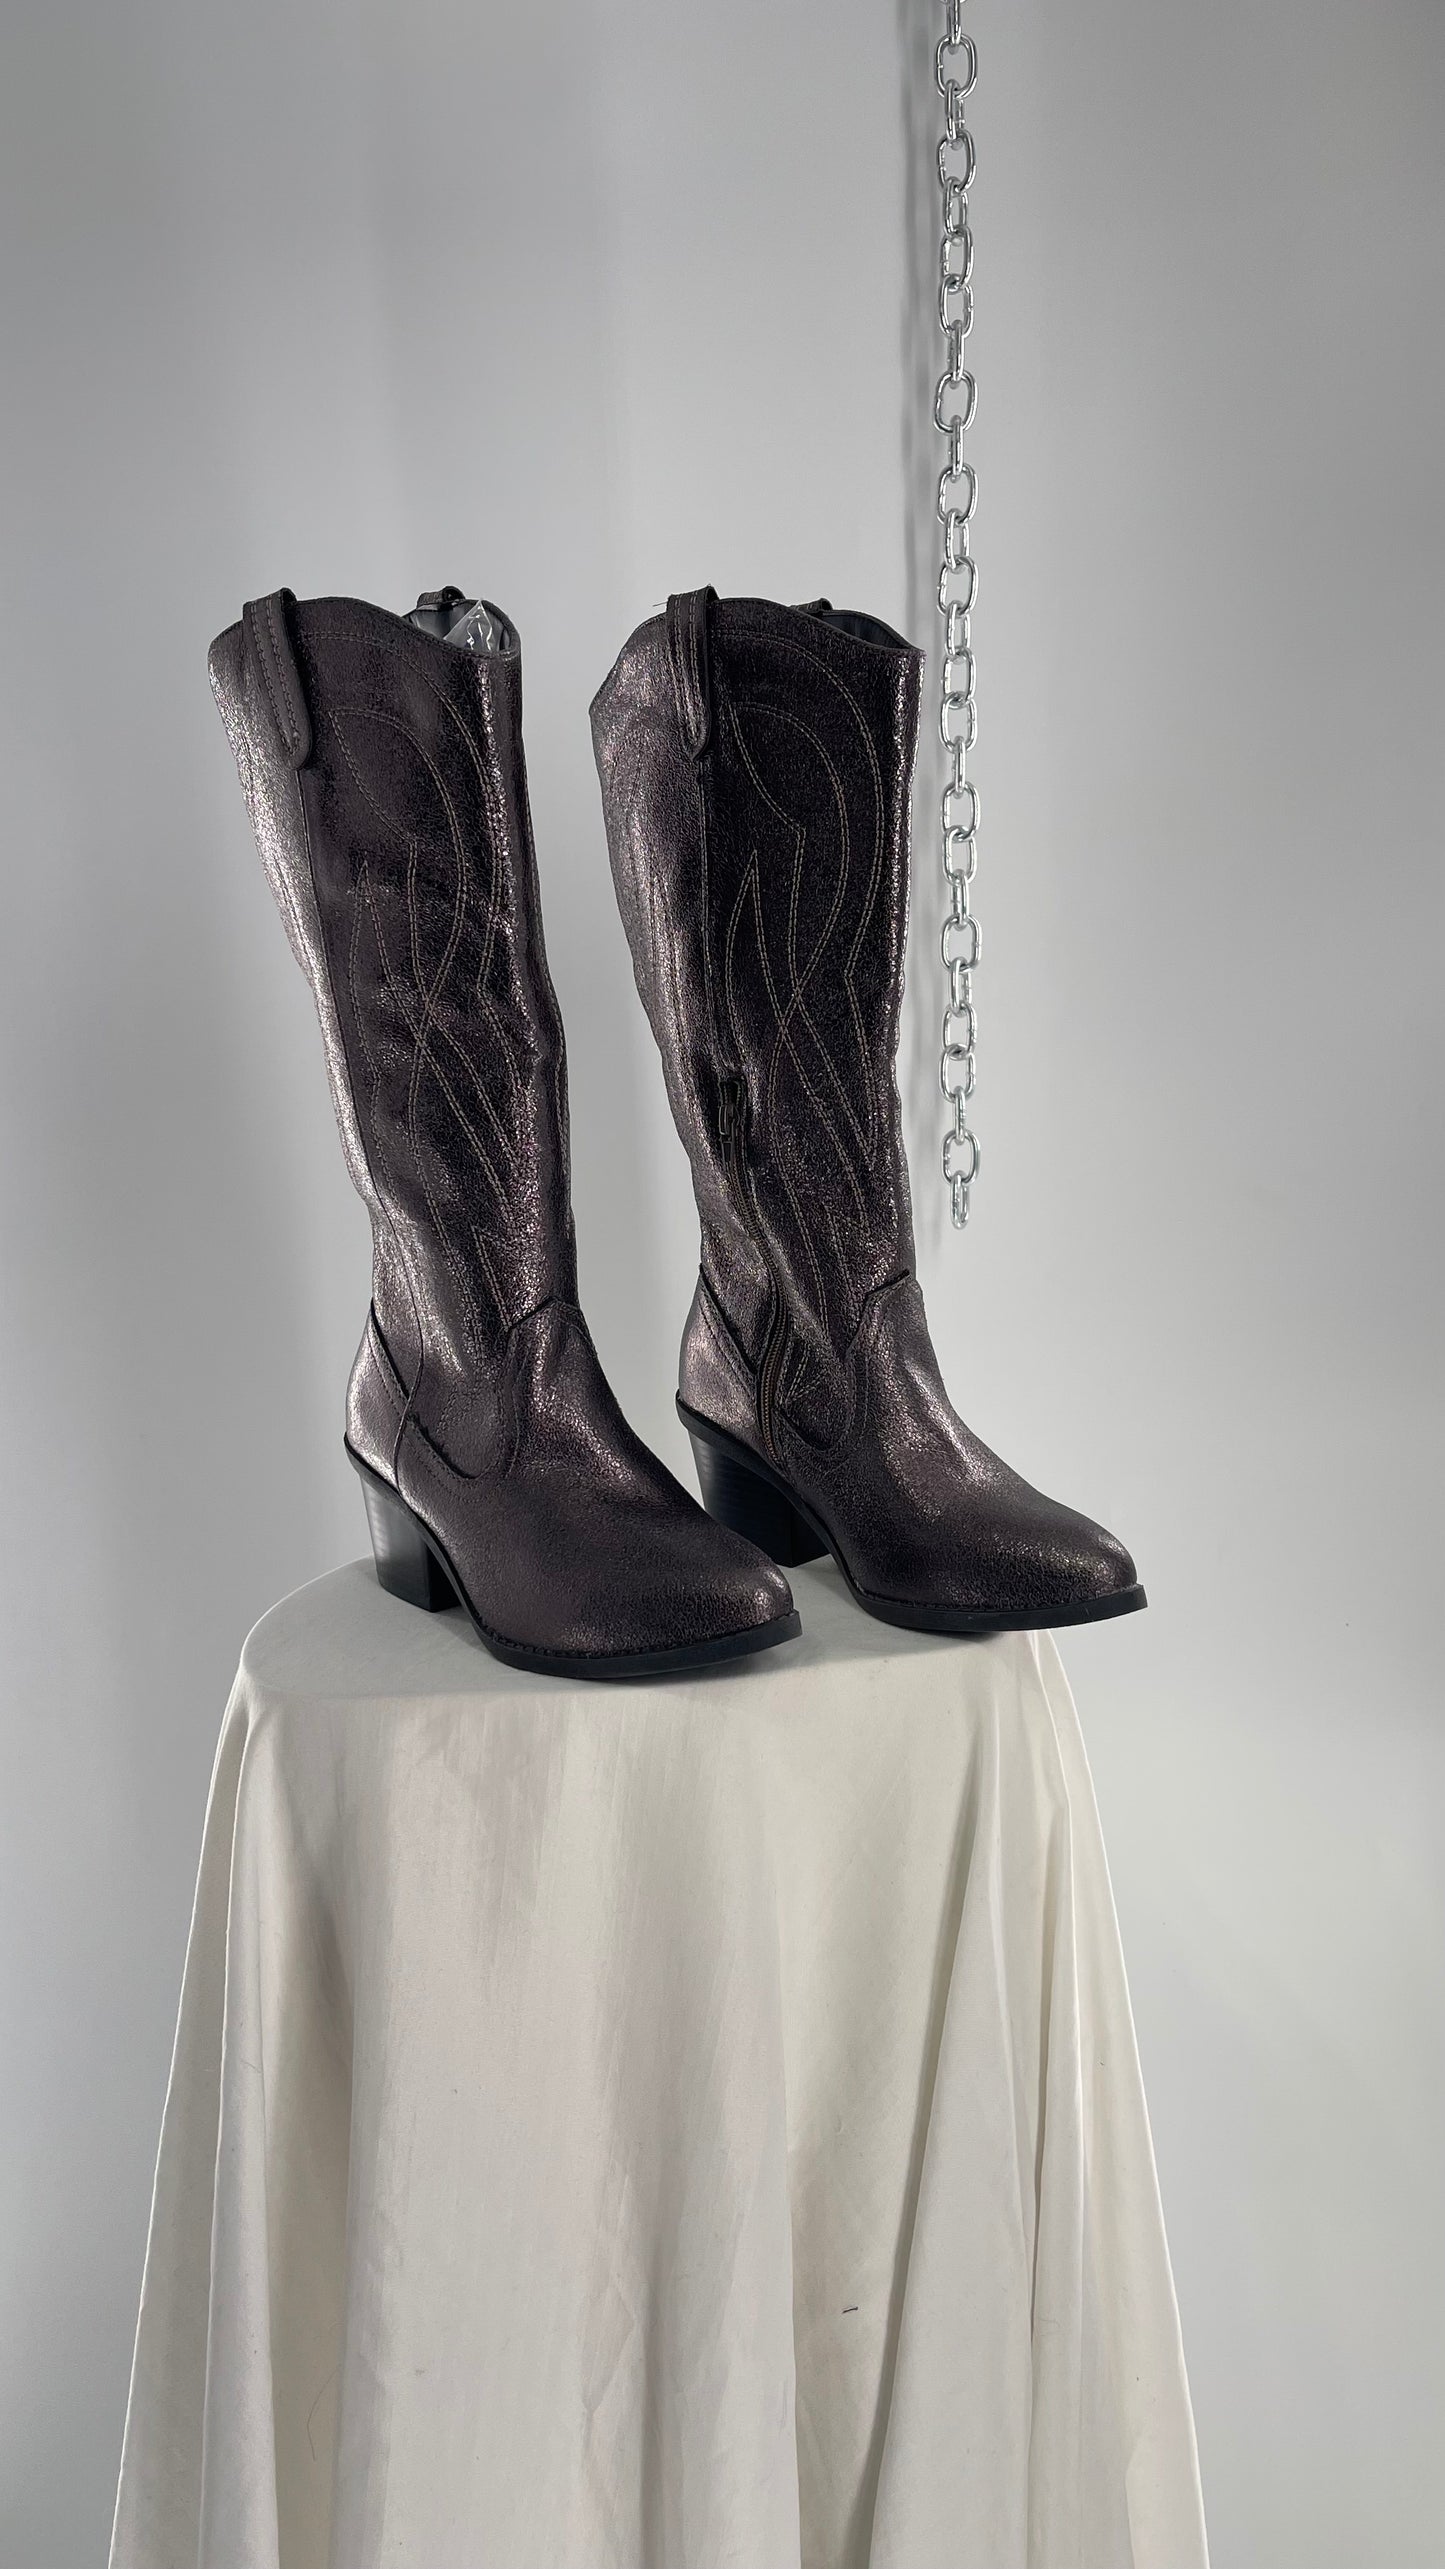 Vintage POP Metallic Silver Knee High Cowgirl Boots with Pointed Toe (6)